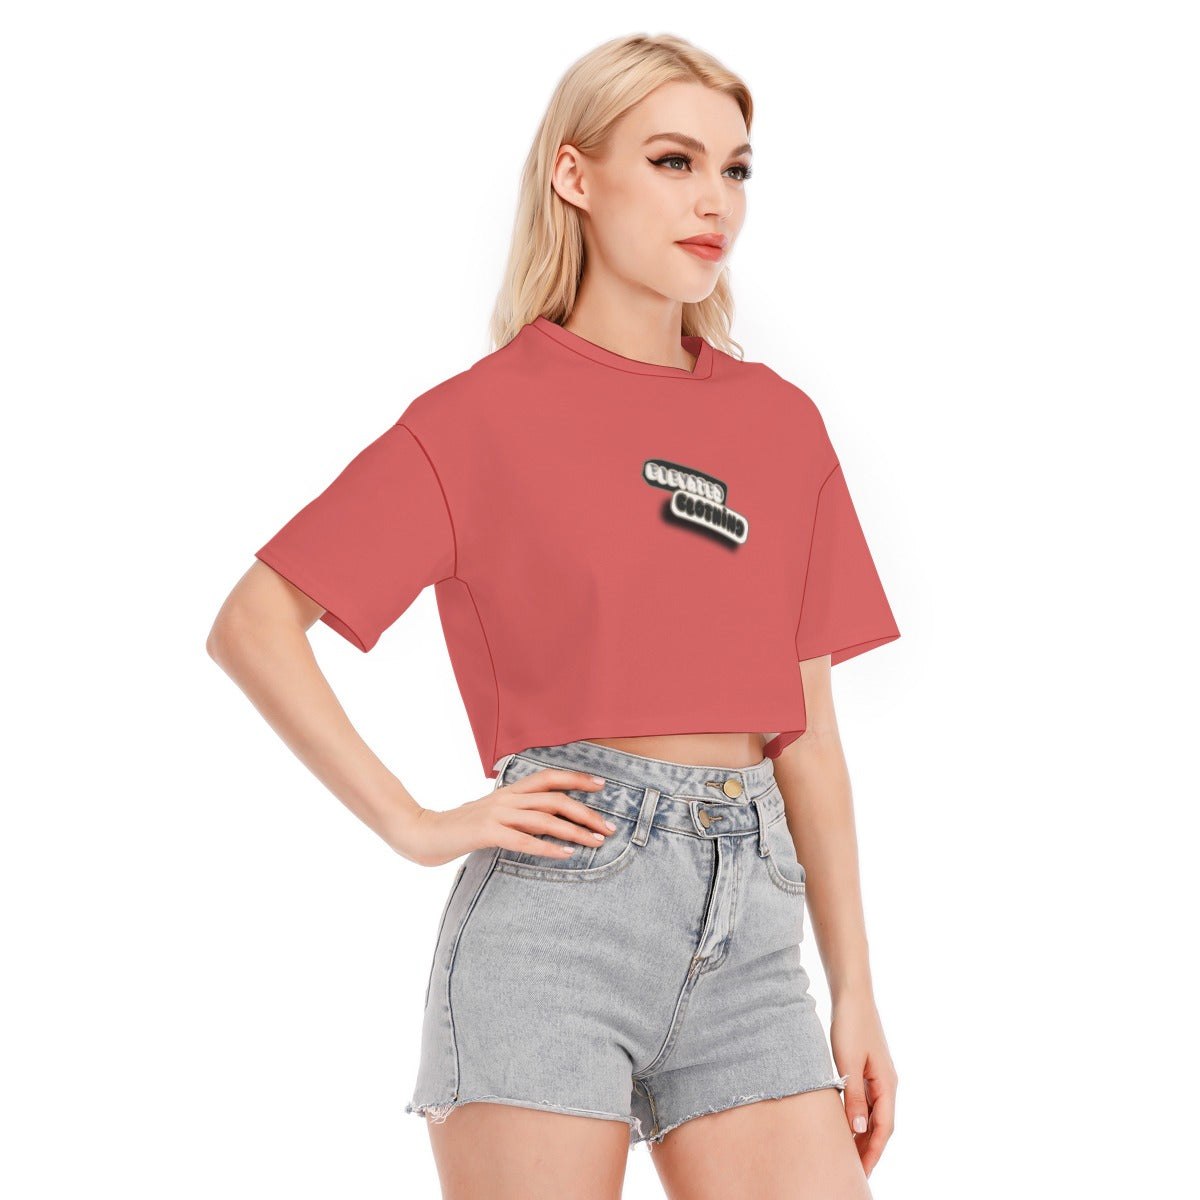 Womens Elevated Clothing Crop Top with Navel